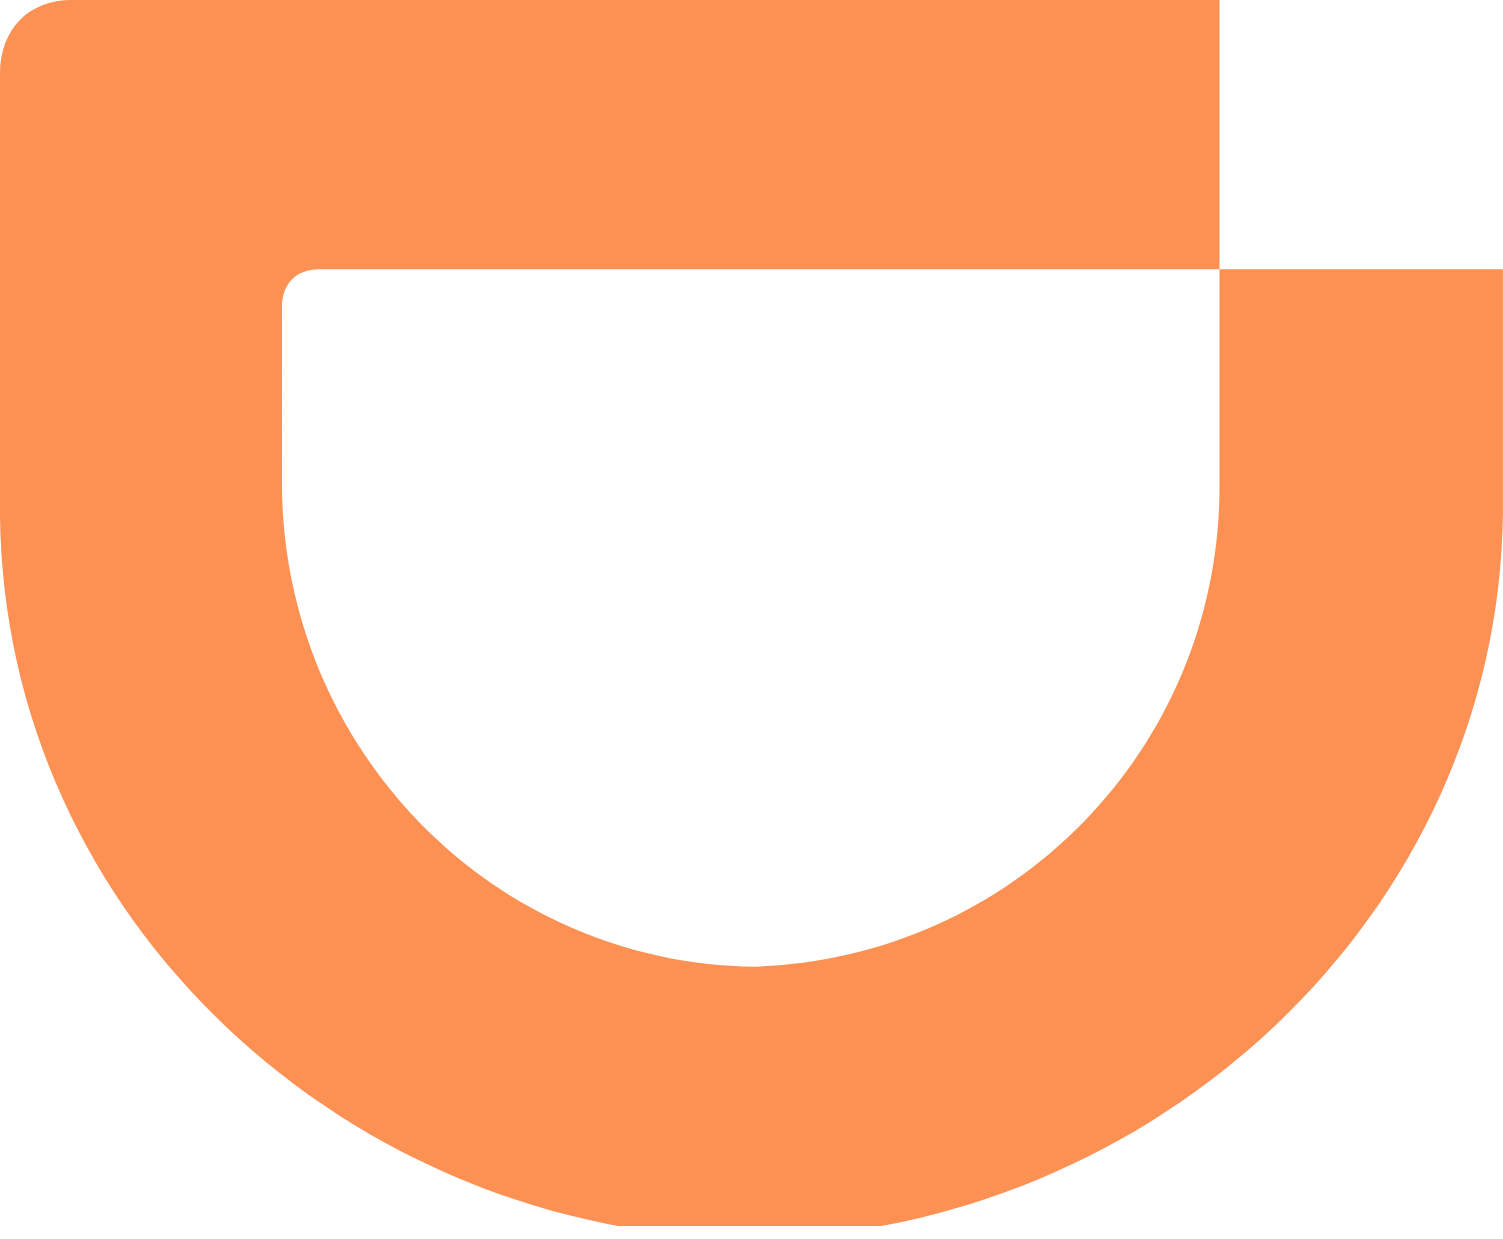 DiDi Logo and symbol, meaning, history, PNG, brand